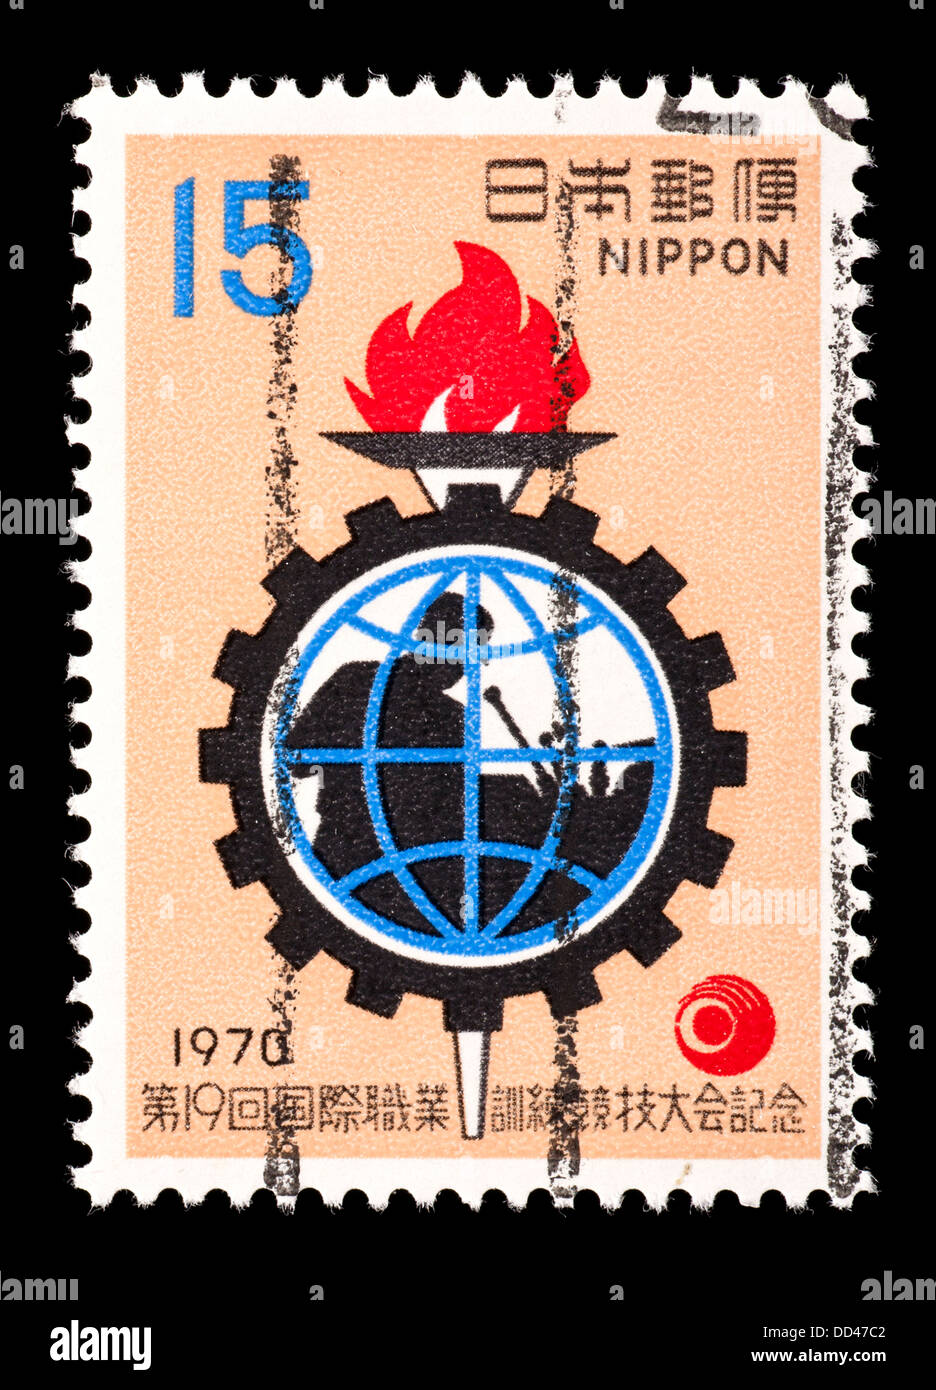 Postage stamp from Japan depicting the Vocational Training Competition emblem in Chiba. Stock Photo